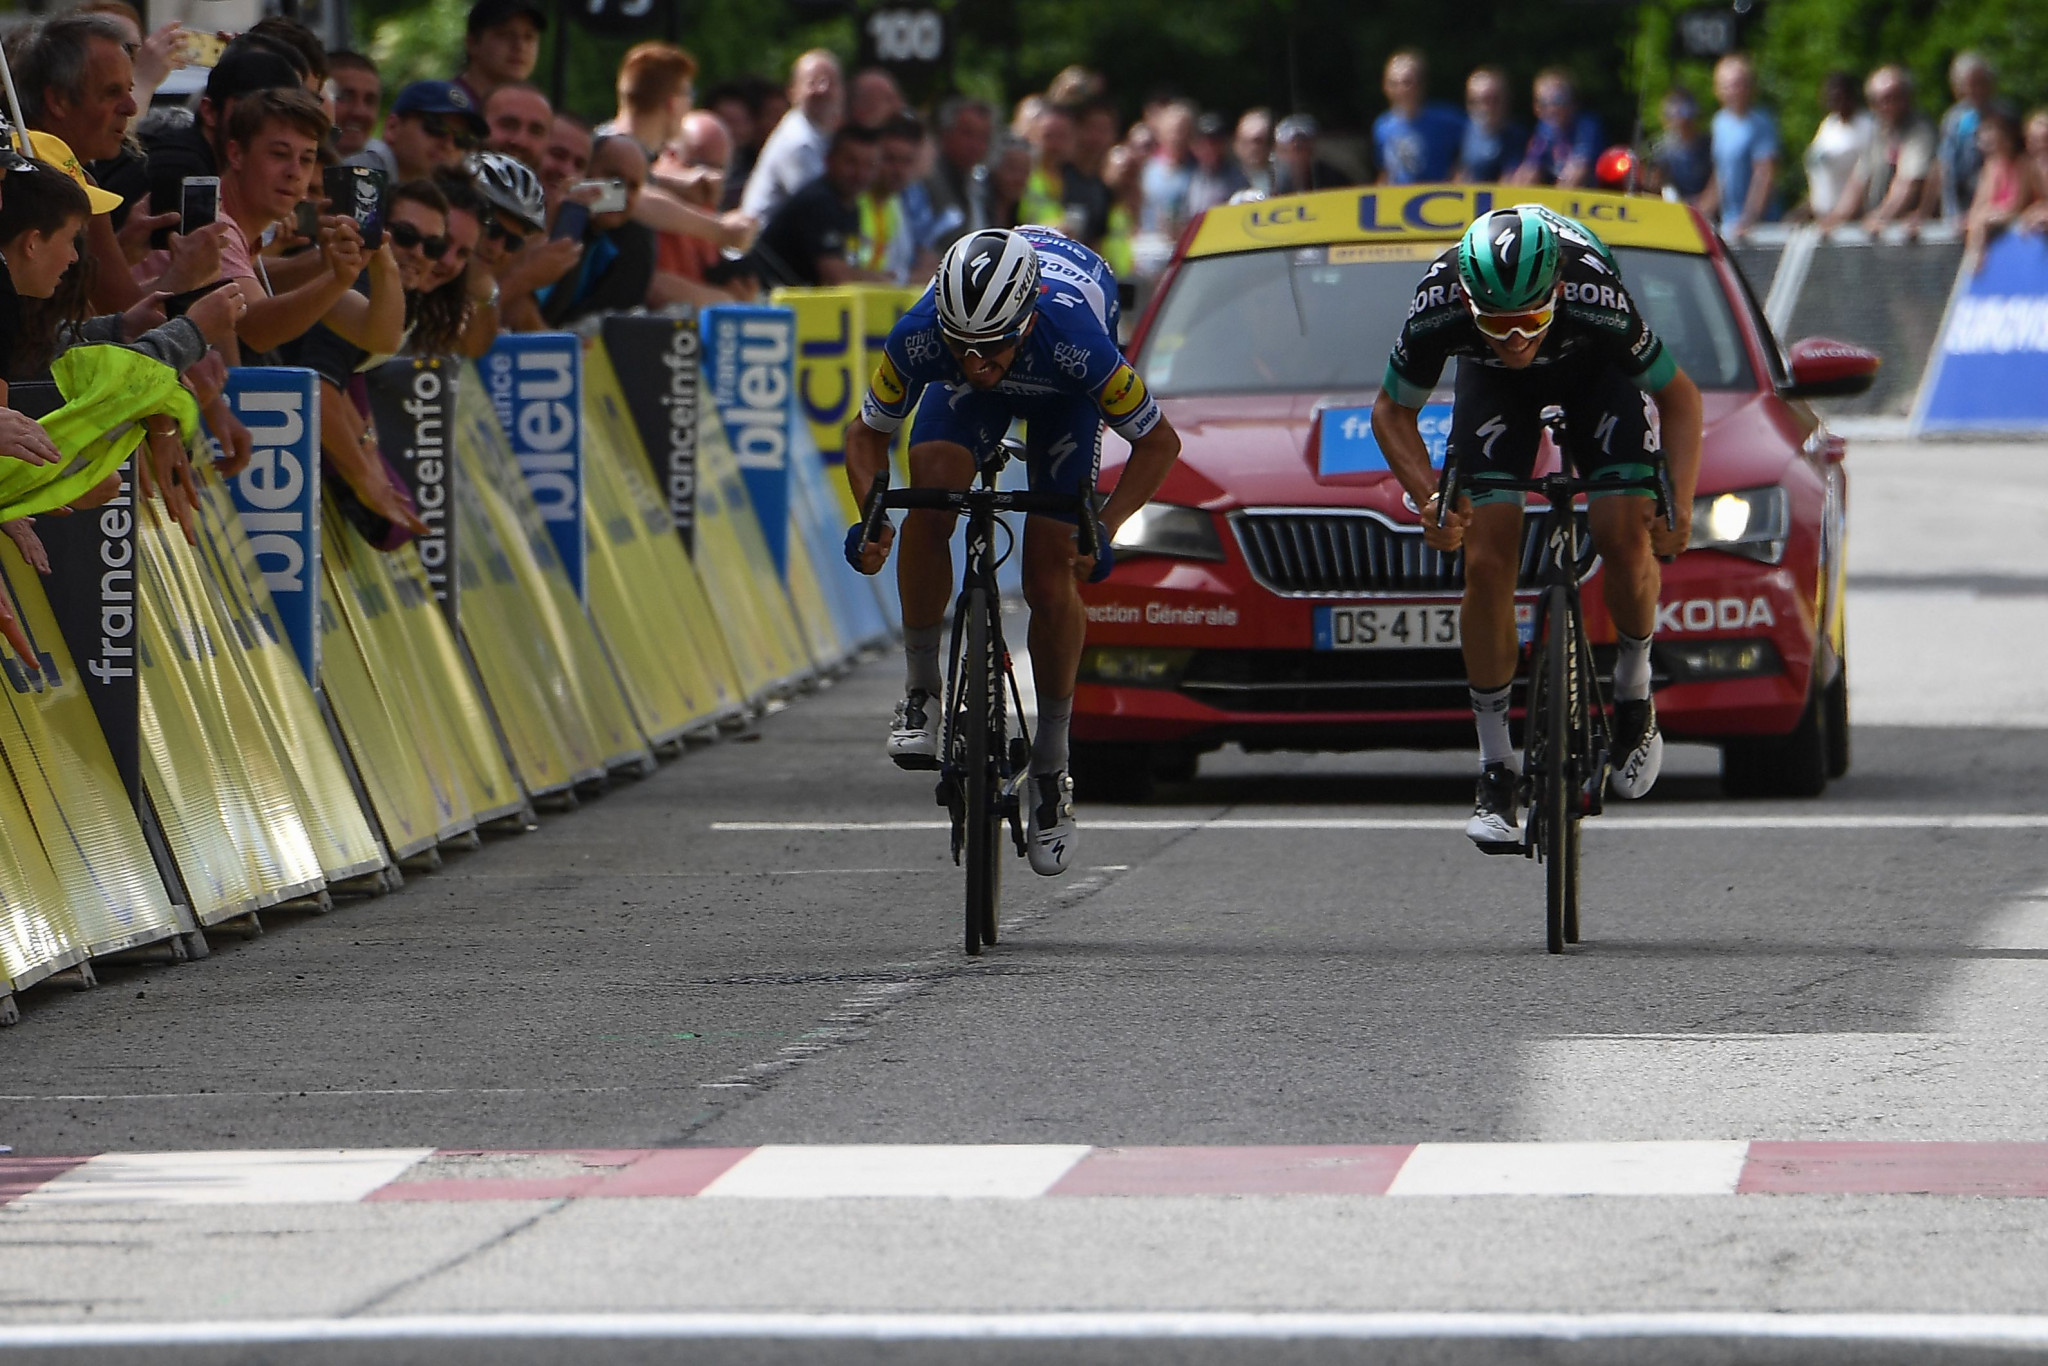 Alaphilippe wins stage six of Critérium du Dauphiné in photo finish as Yates retains overall lead